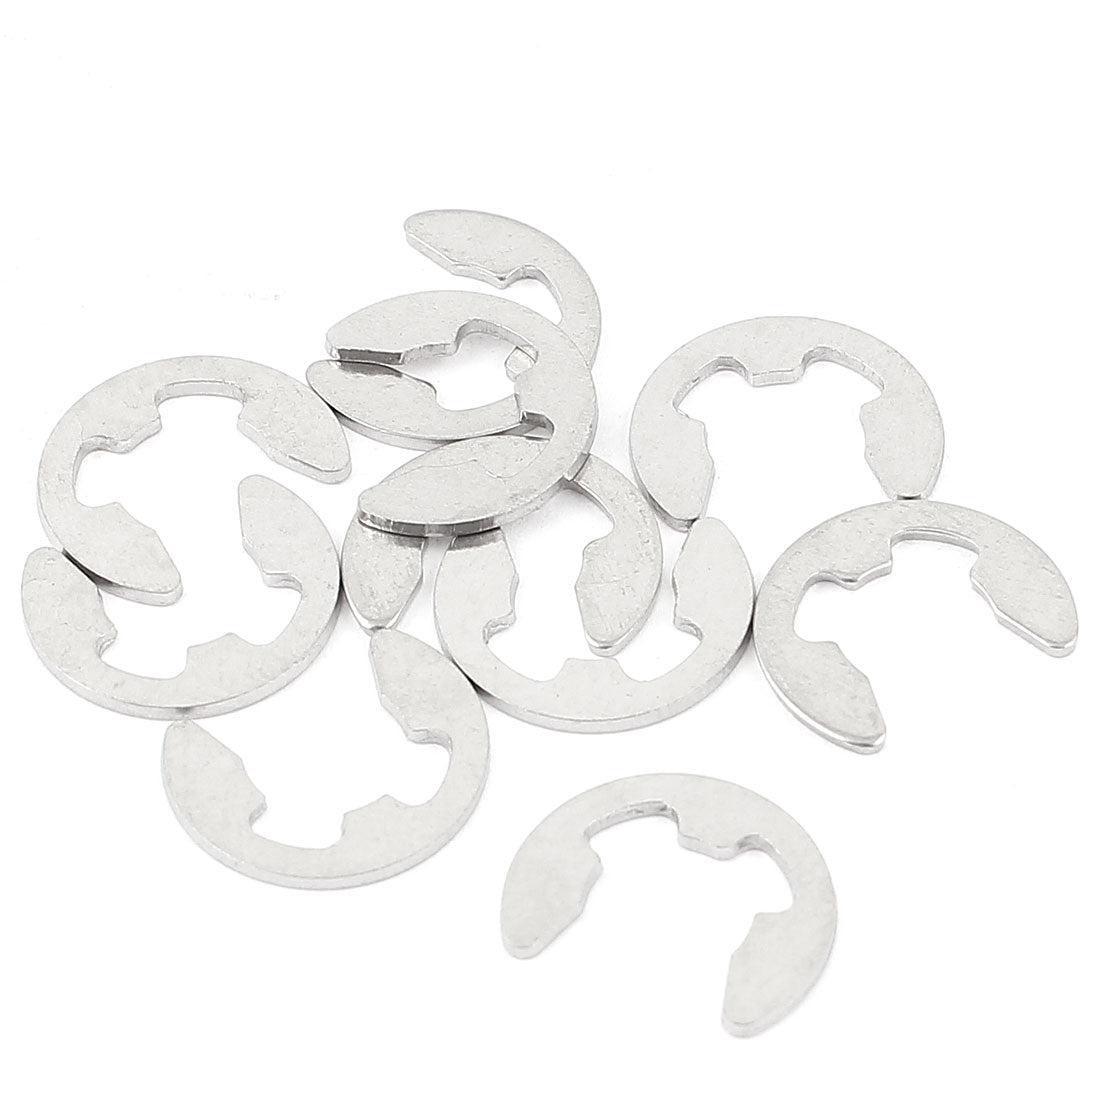 uxcell Uxcell 10pcs 304 Stainless Steel Fastener External Retaining Ring E-Clip Circlip 8mm